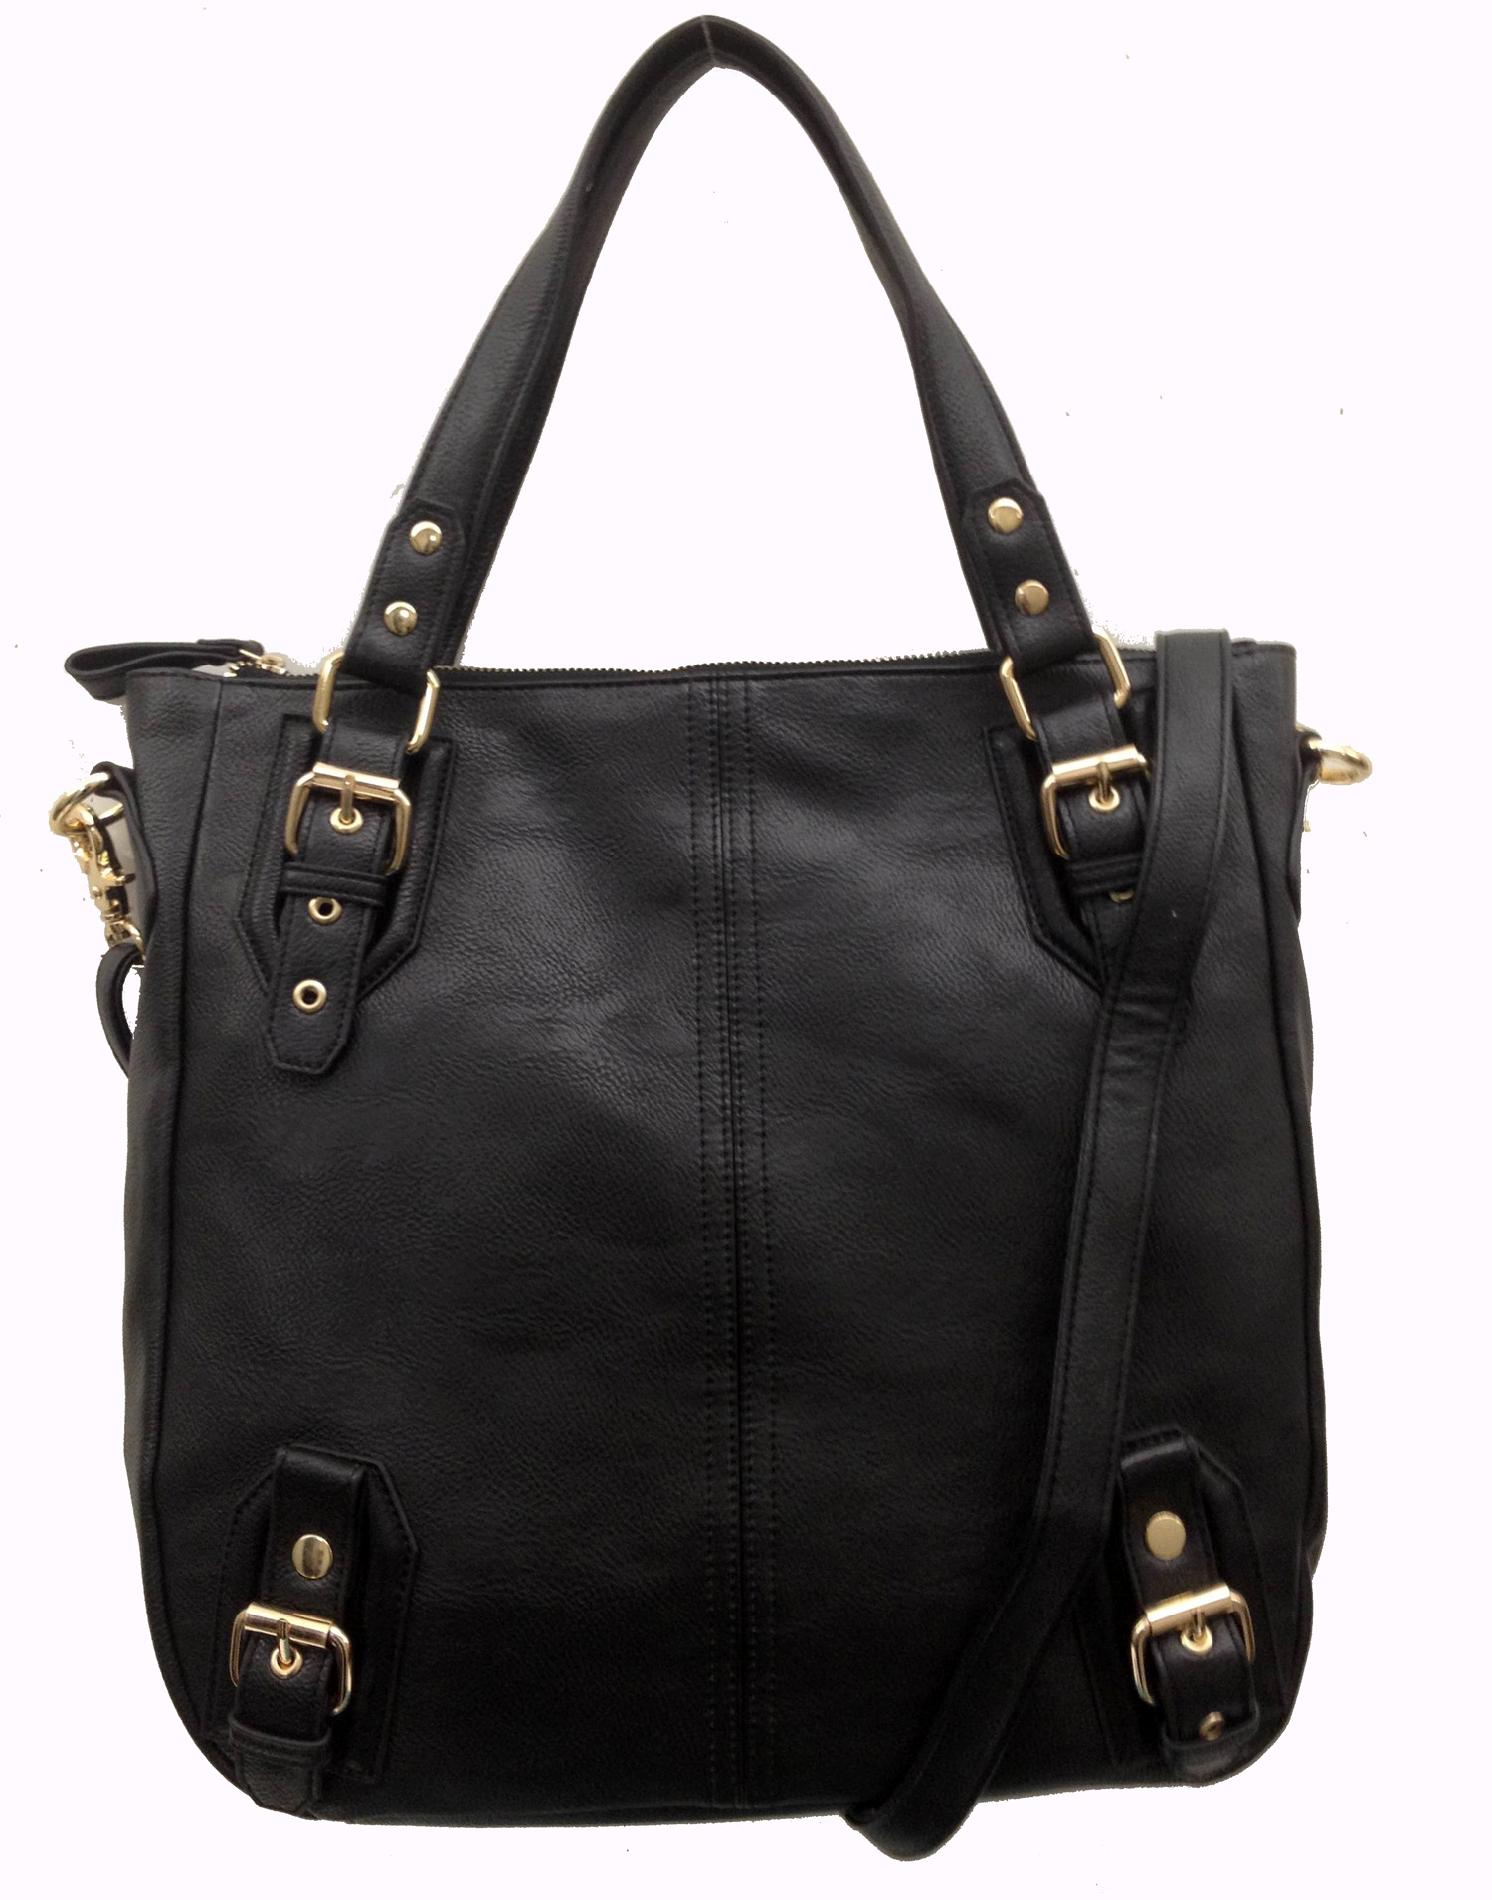 Tote Bags: Buy Tote Bags In Clothing, Shoes & Jewelry at Sears